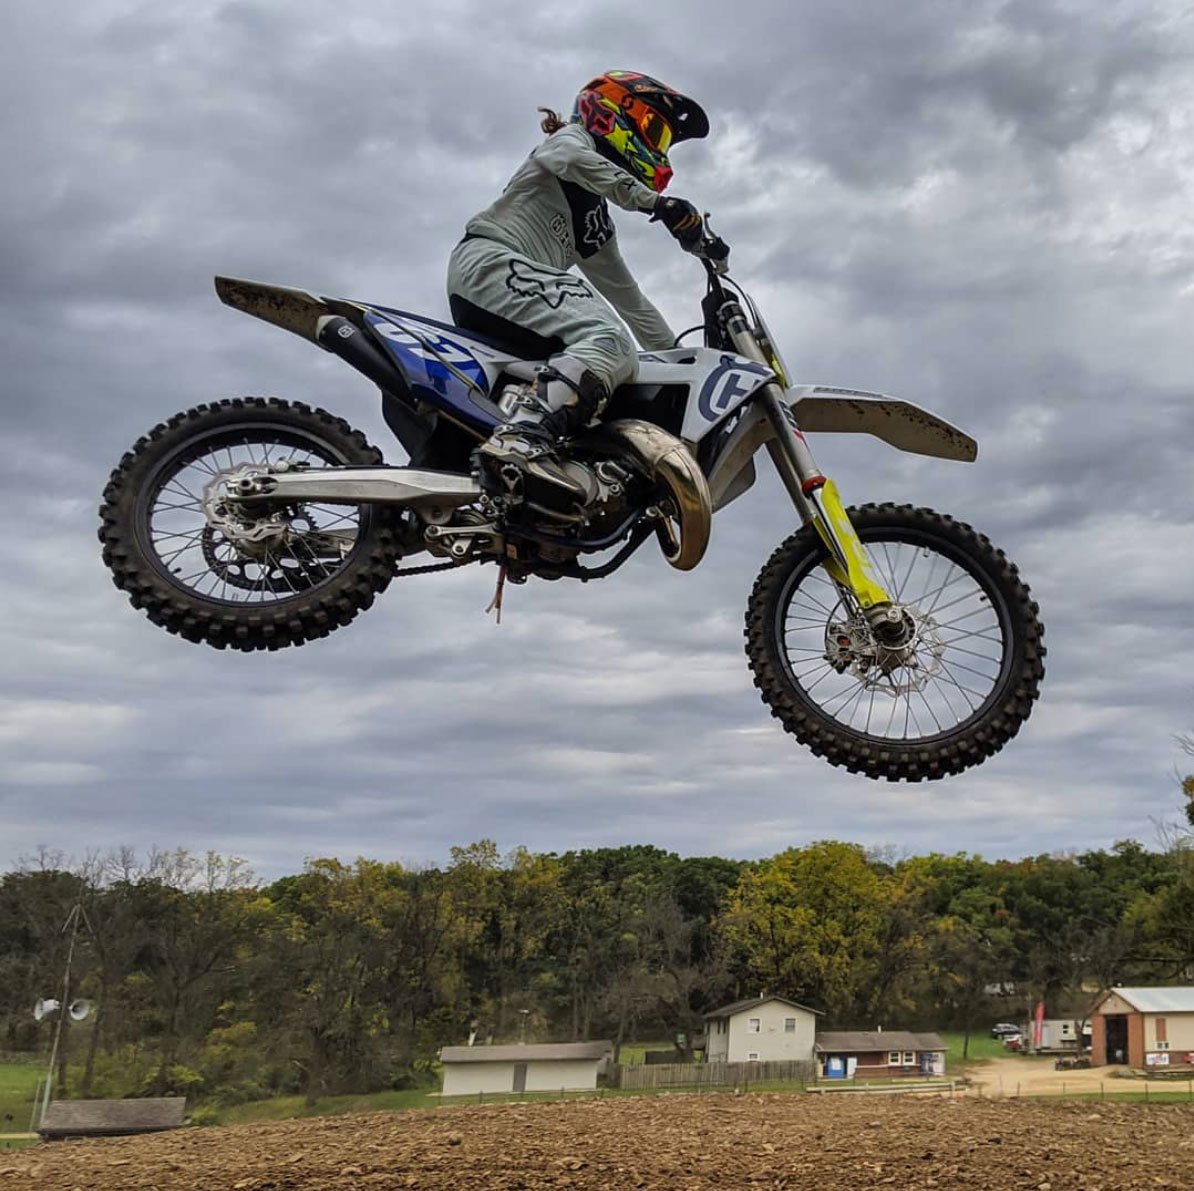 Ashley Fiolek, first deaf motorcross champion, mid jump on her bike with clear ground beneath